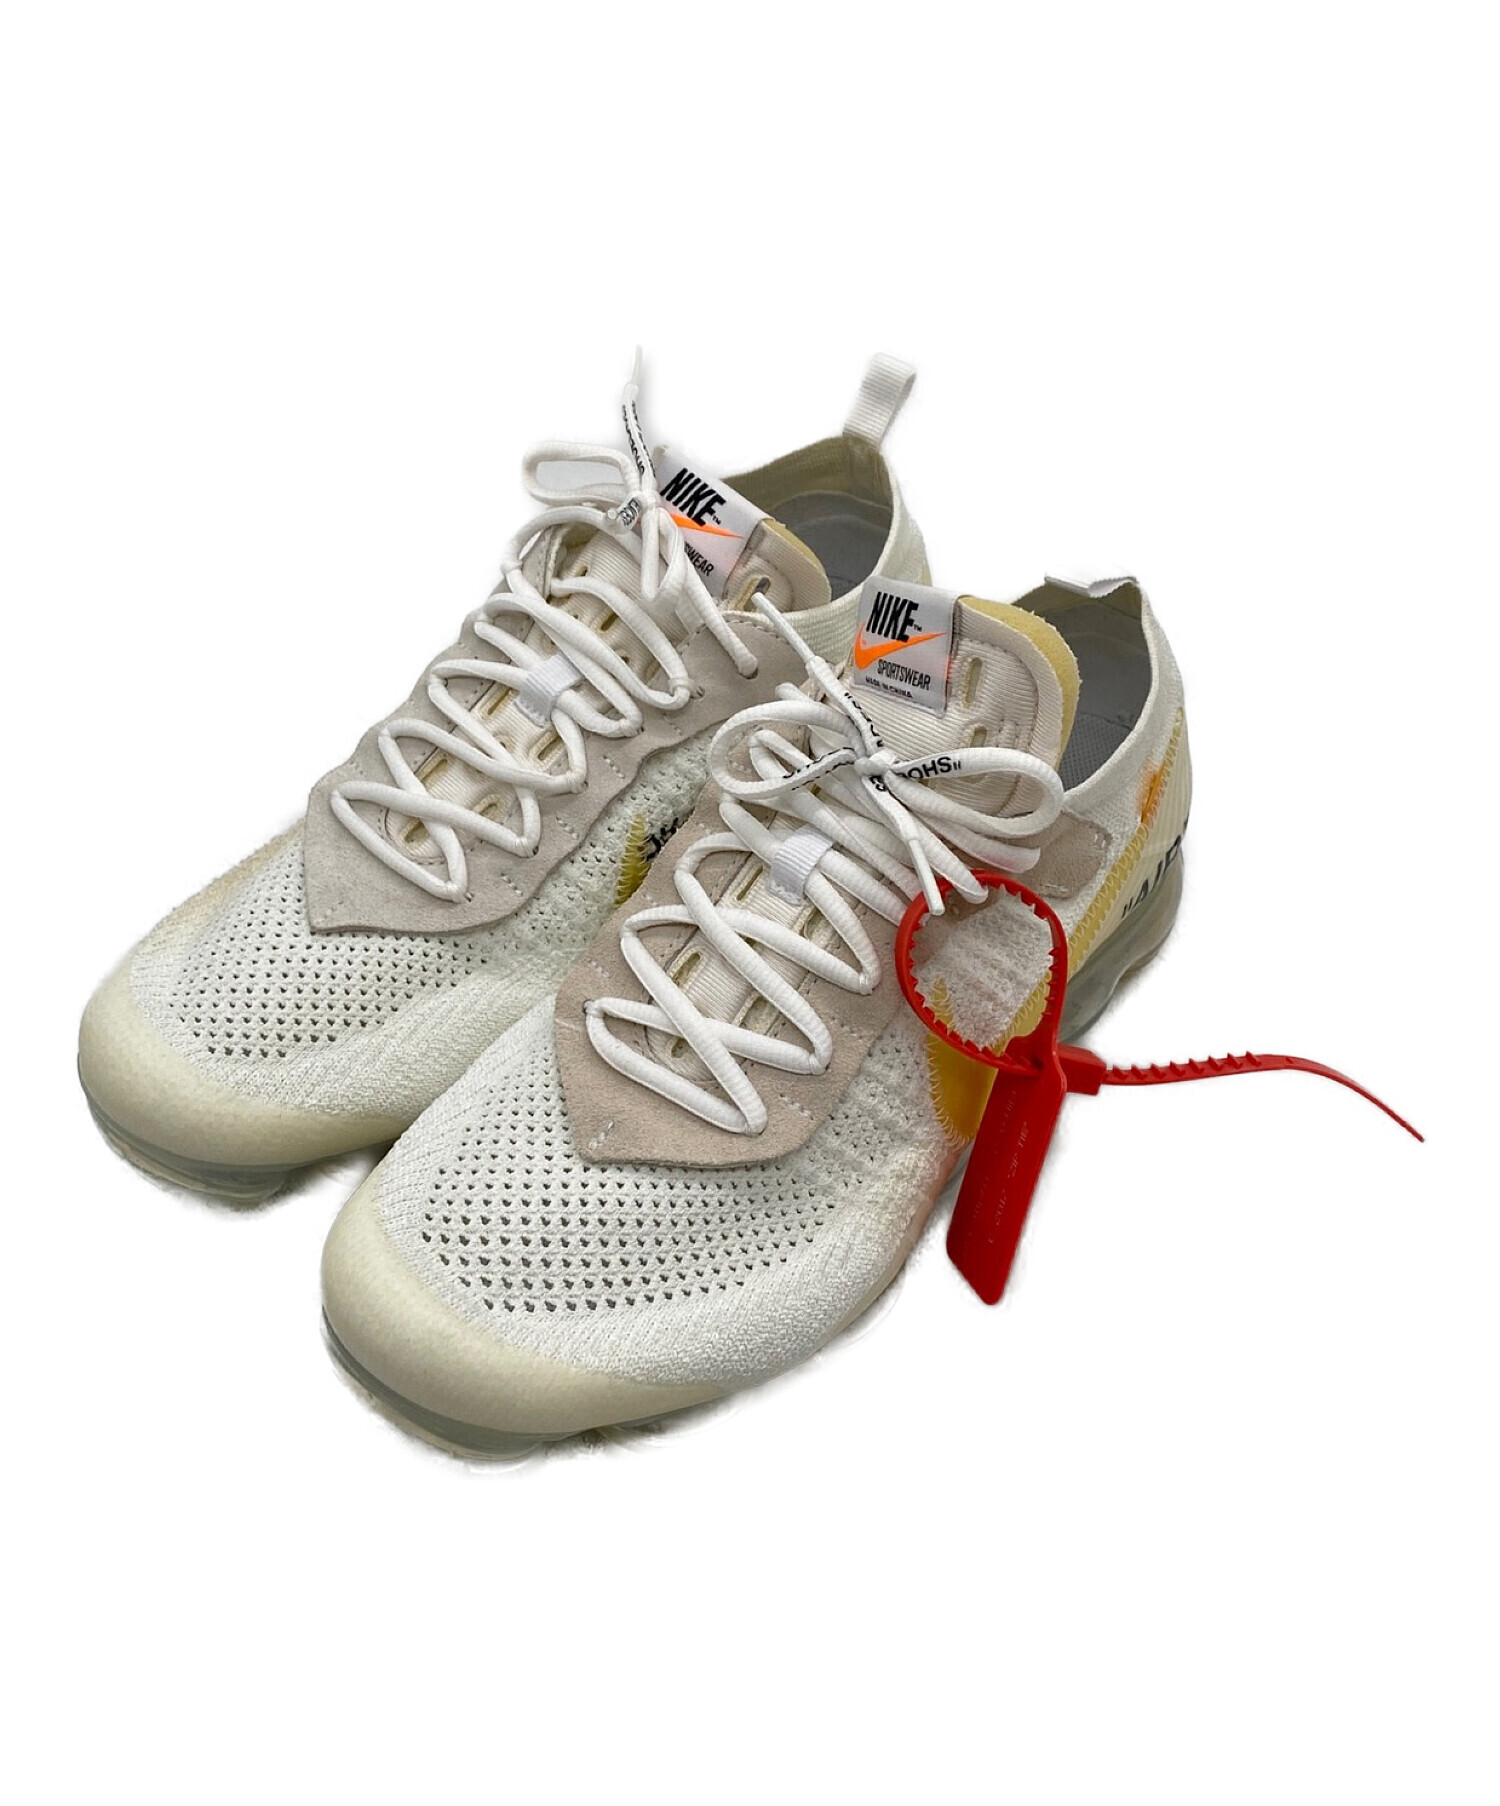 snkrs off white nikeメンズ